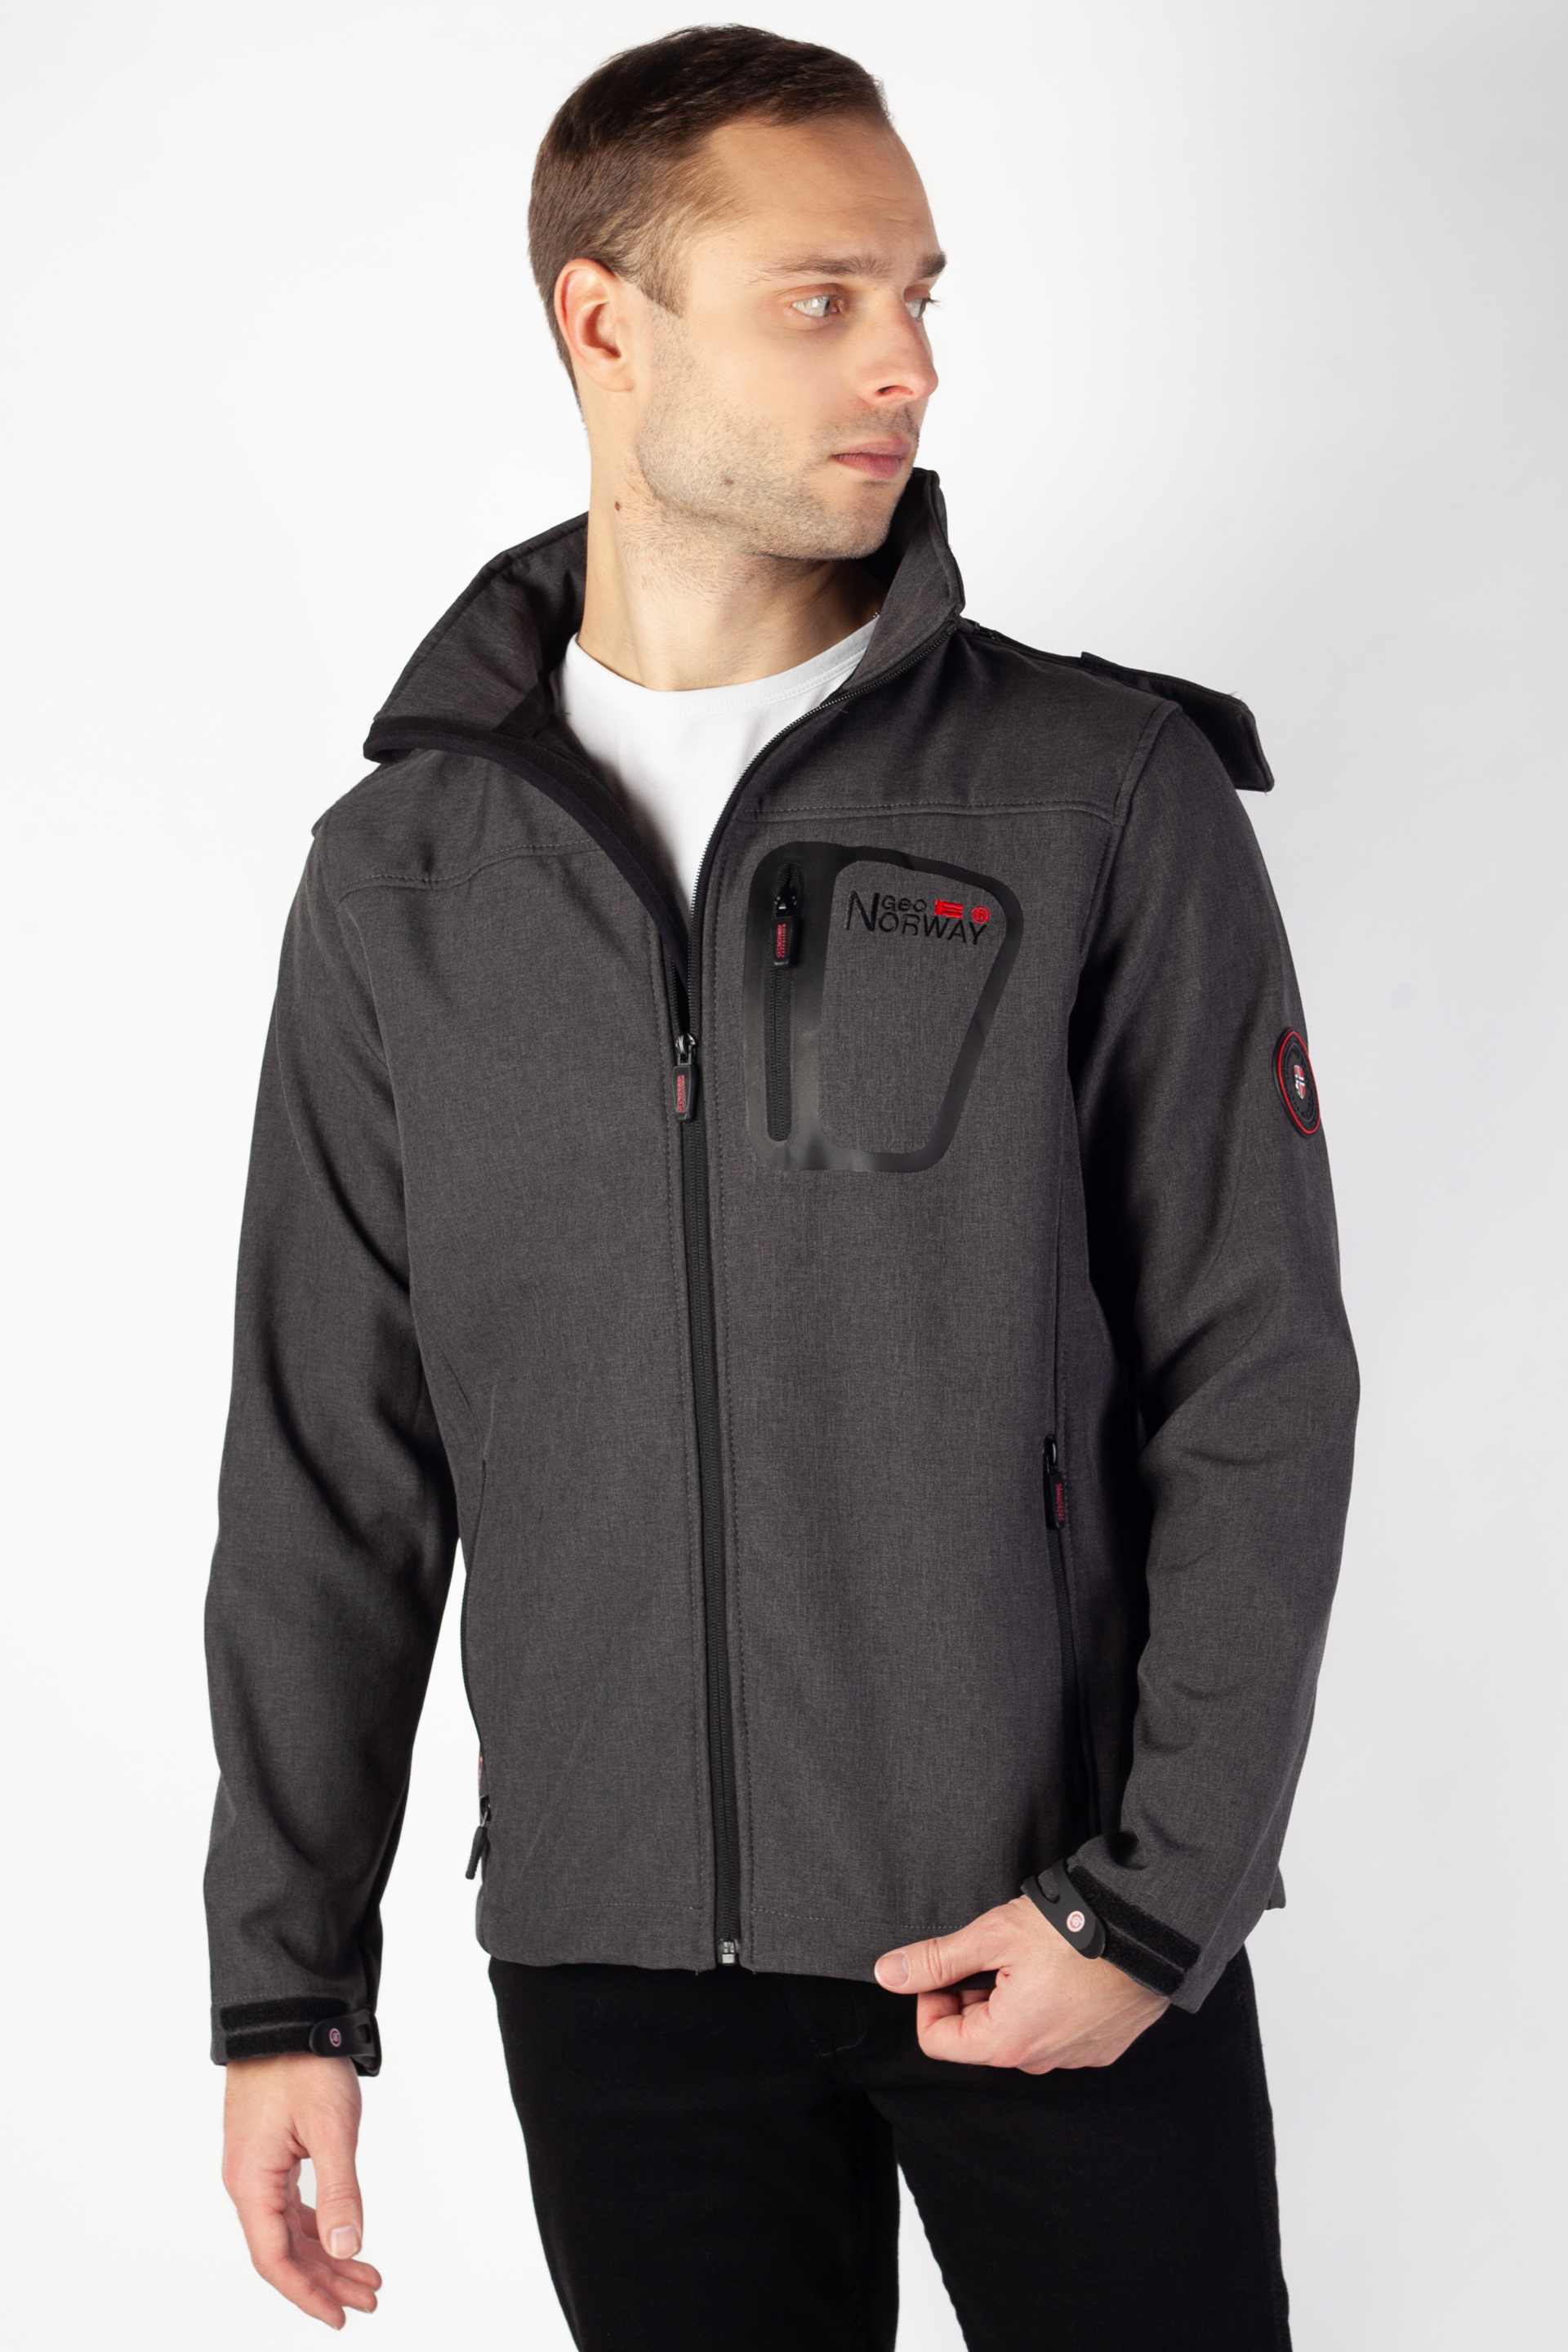 Striukė GEOGRAPHICAL NORWAY TEXSHELL-Dark-Grey